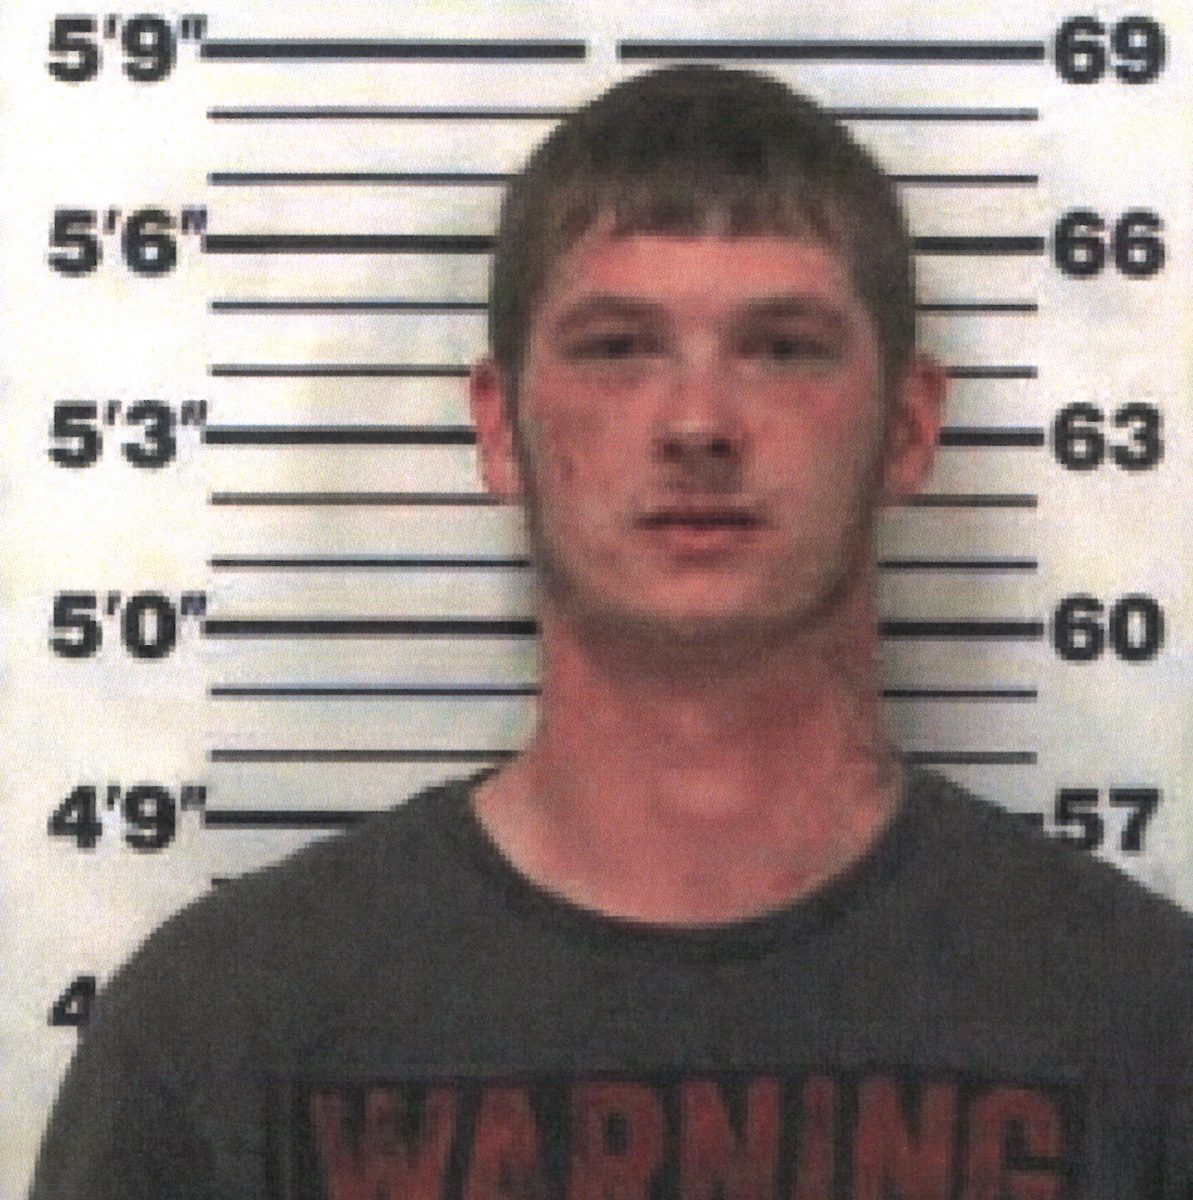 Henderson County Man Wanted for Questioning in Chester County Homicide